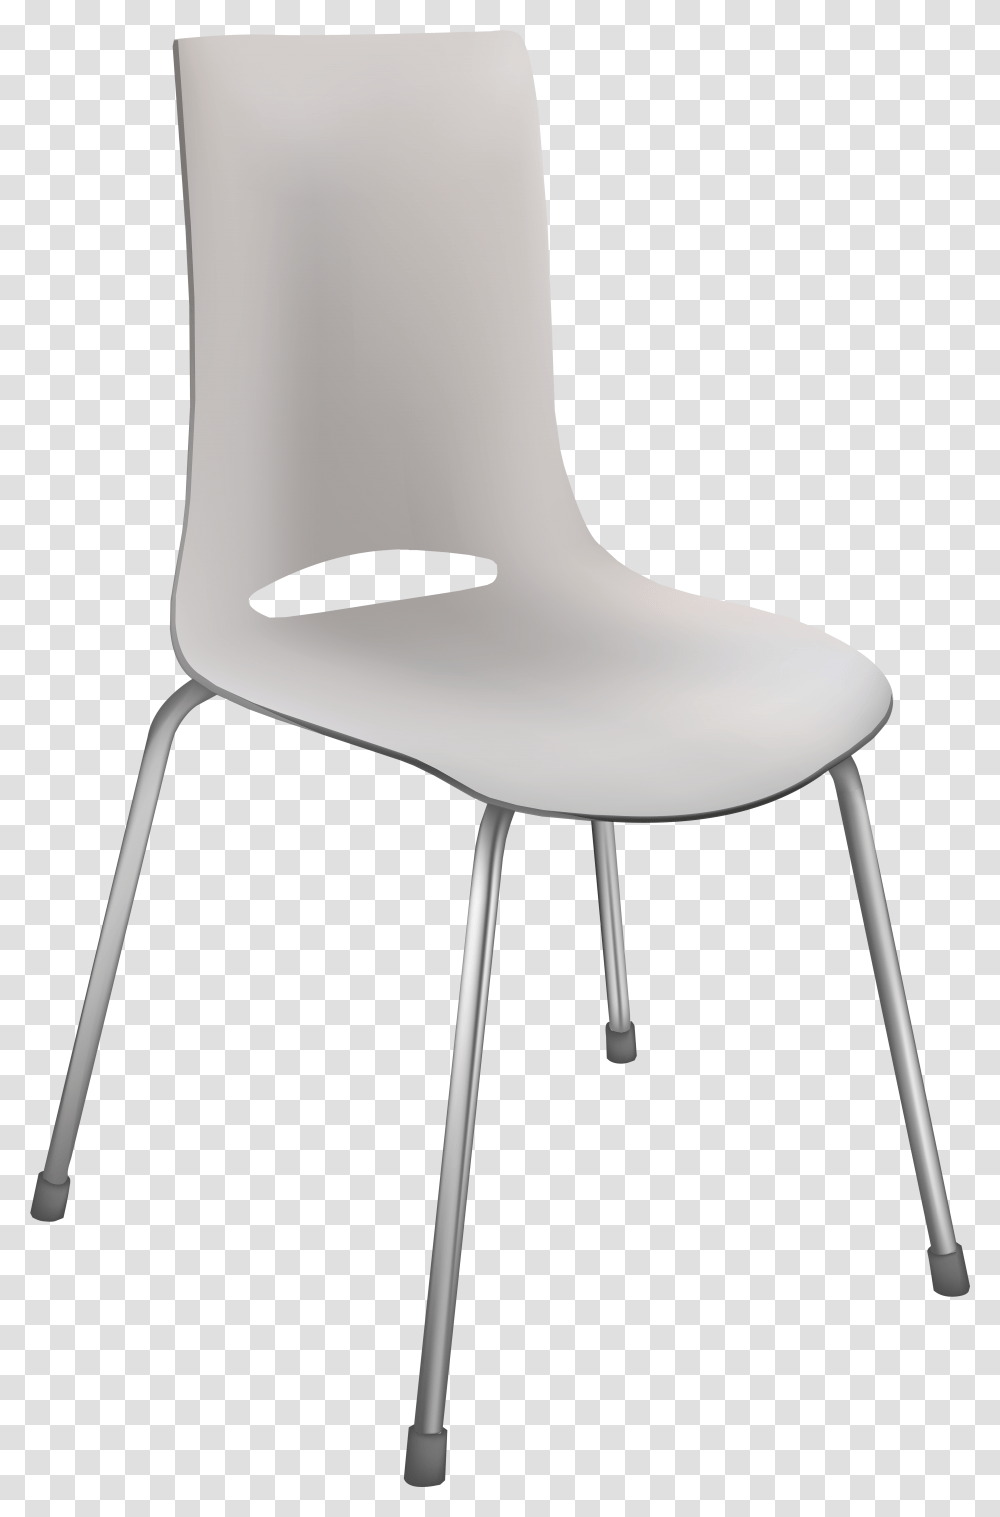 Chair White Chair, Furniture, Lamp Transparent Png